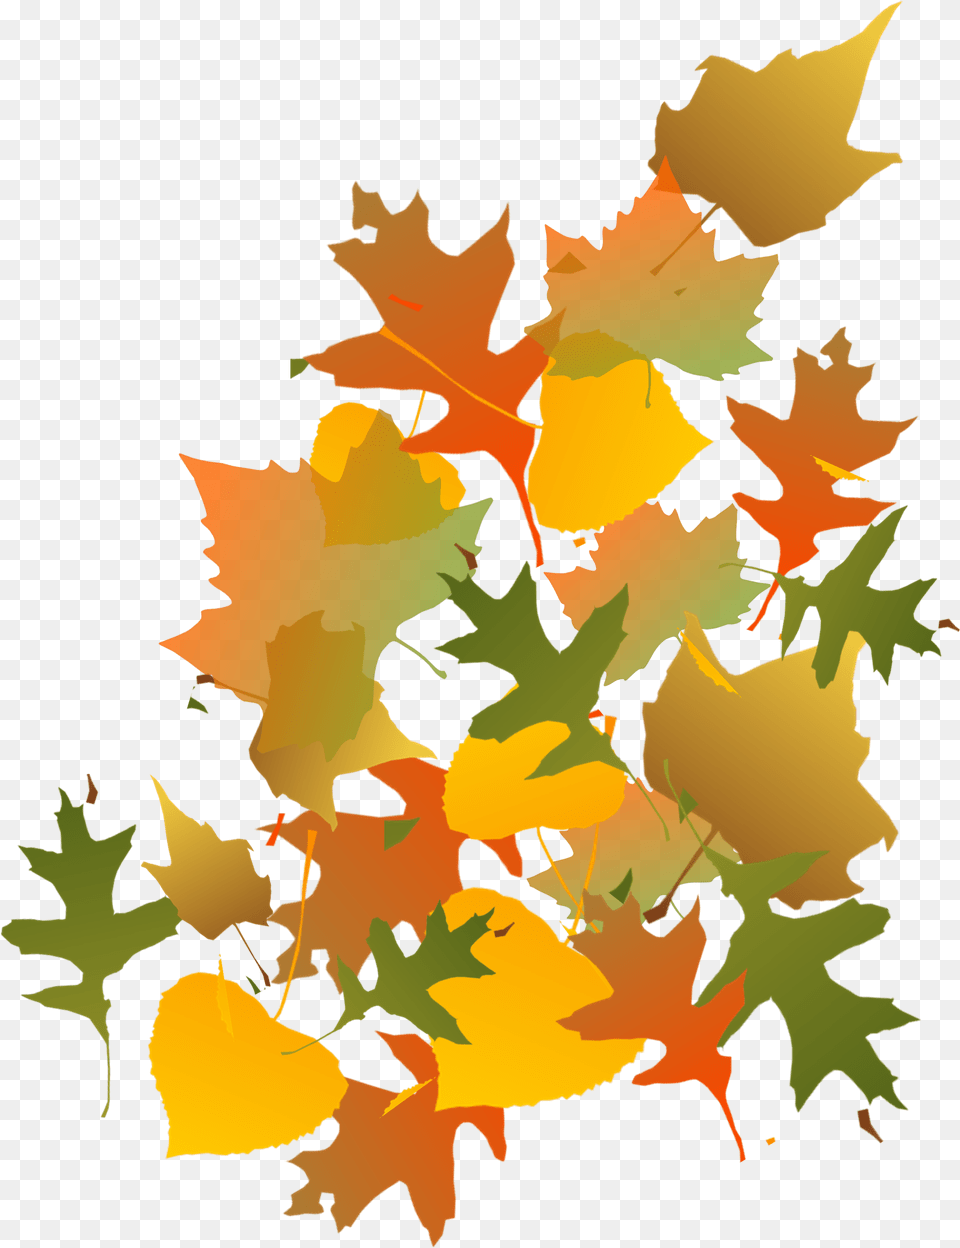 Fall Leaves Image Autumn Leaves Clip Art, Leaf, Plant, Tree, Maple Png